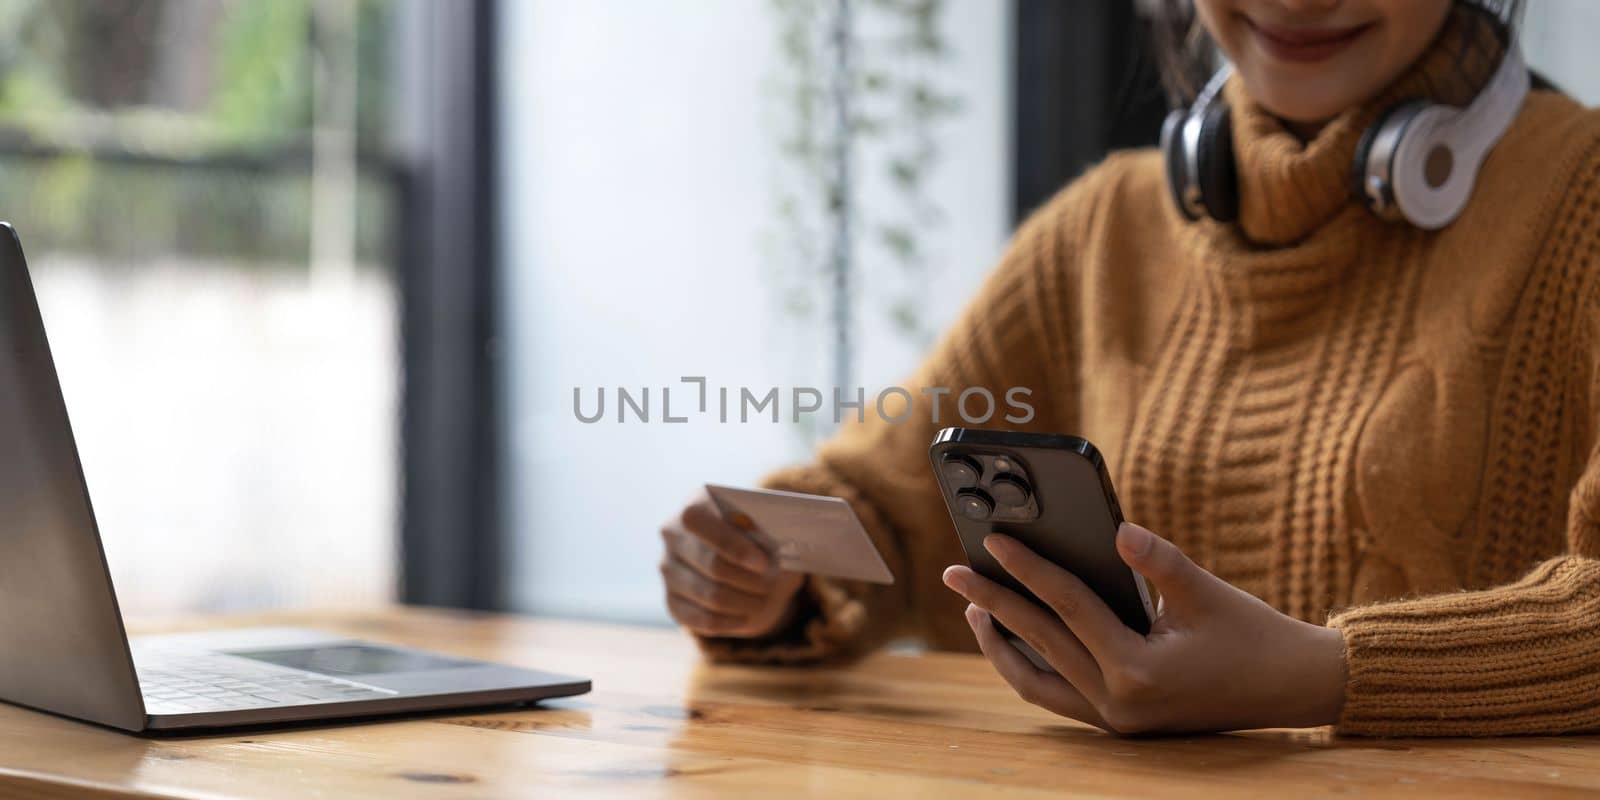 Attractive Asian female sits at her desk, holding a smartphone and a credit card. close-up image. Online payment, credit card payment, mobile banking, online shopping, cashless society...